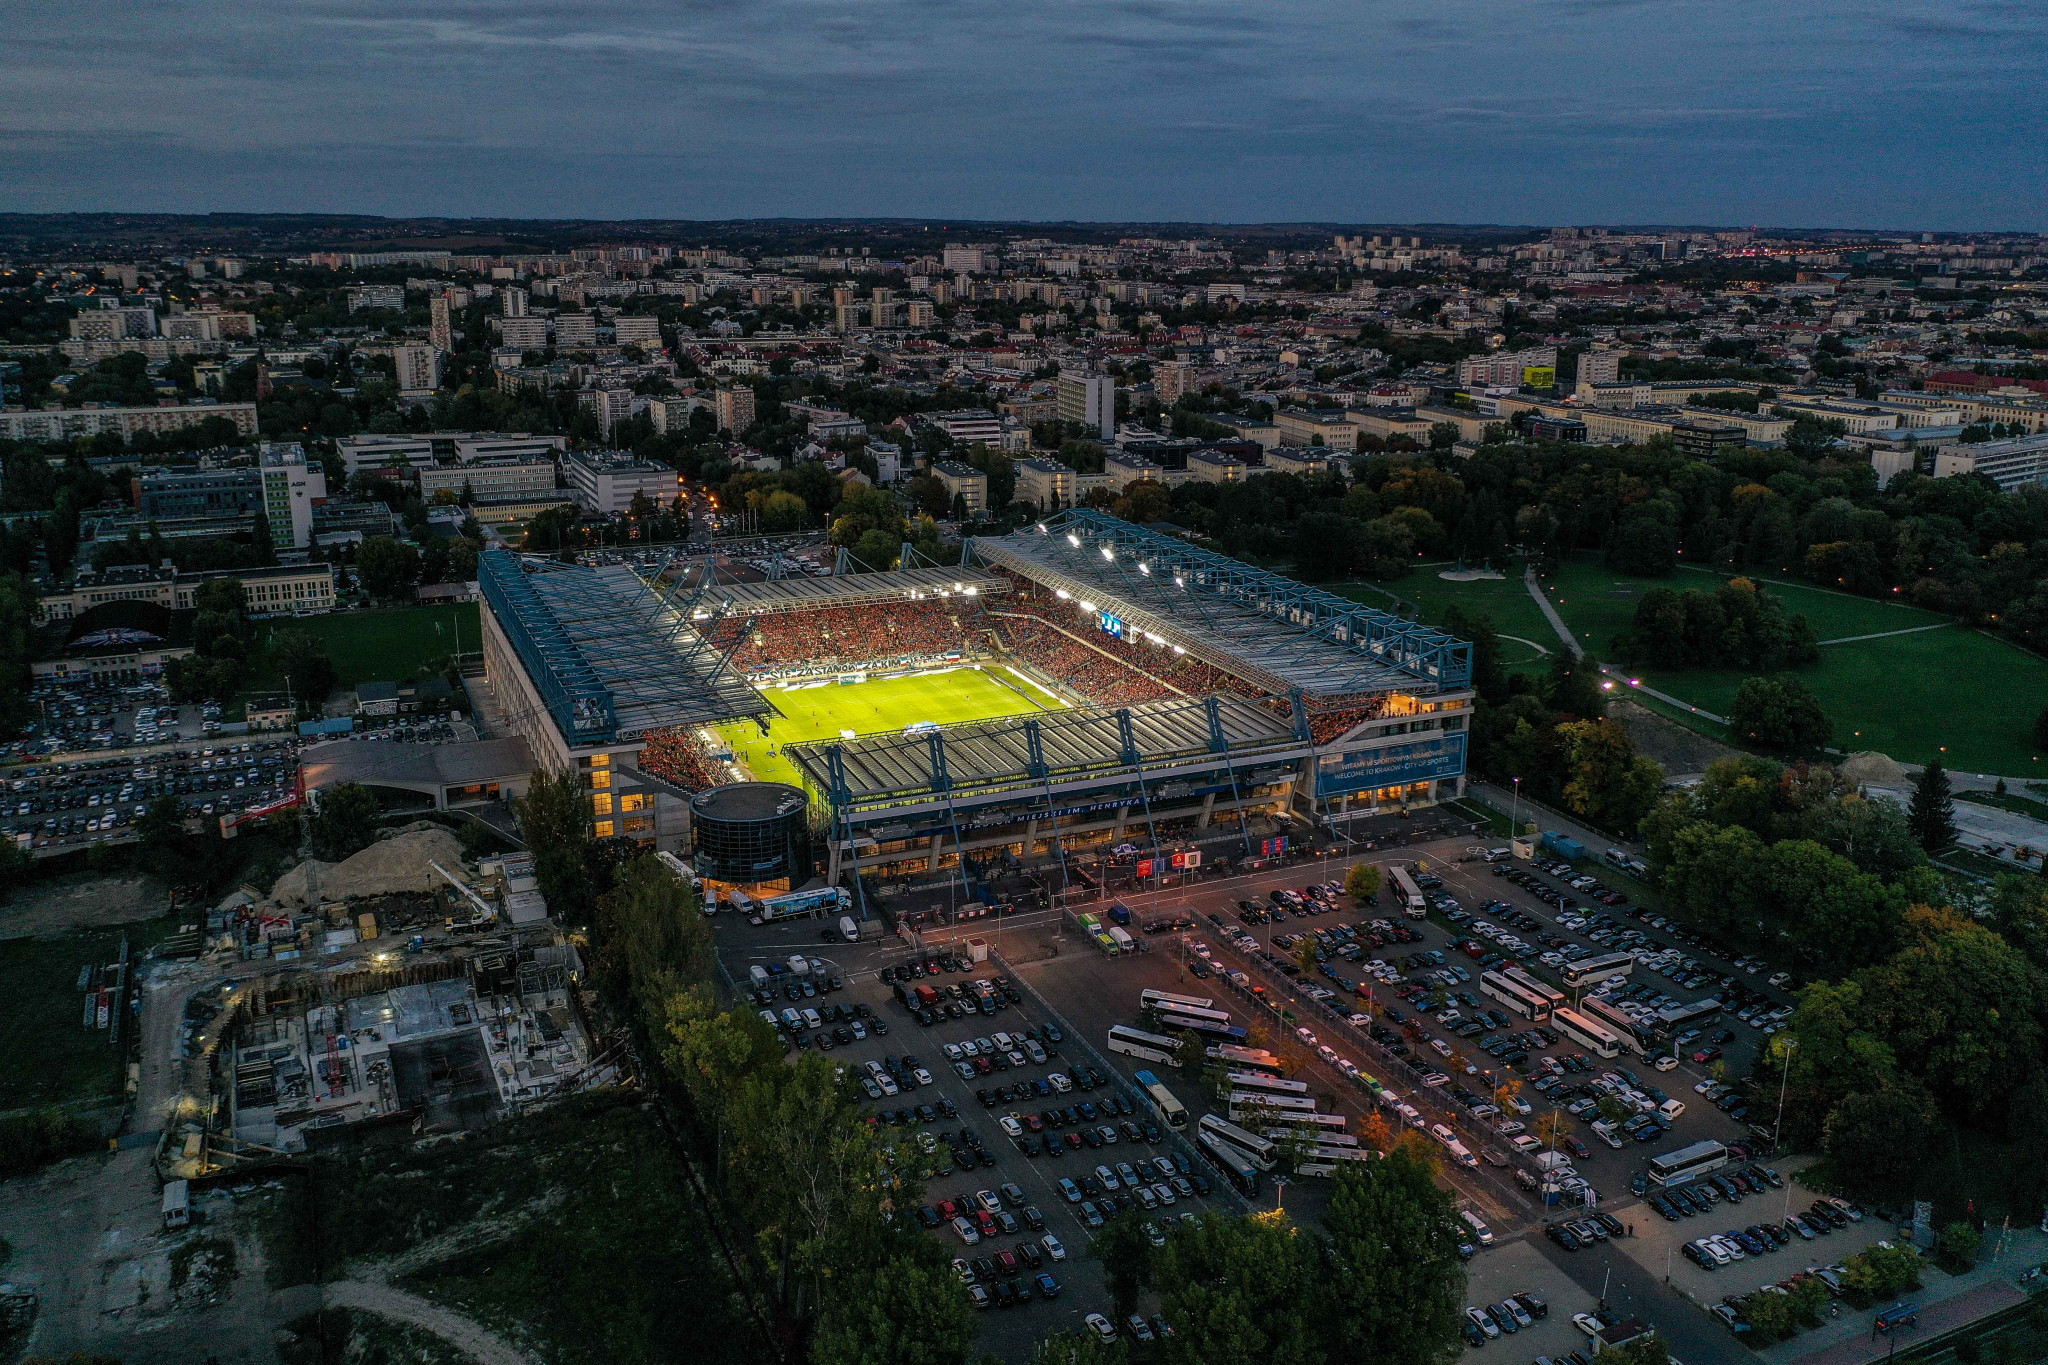 The Henryk Reyman Stadium is due to host the Opening Ceremony and rugby sevens at the European Games ©Kraków-Małopolska 2023